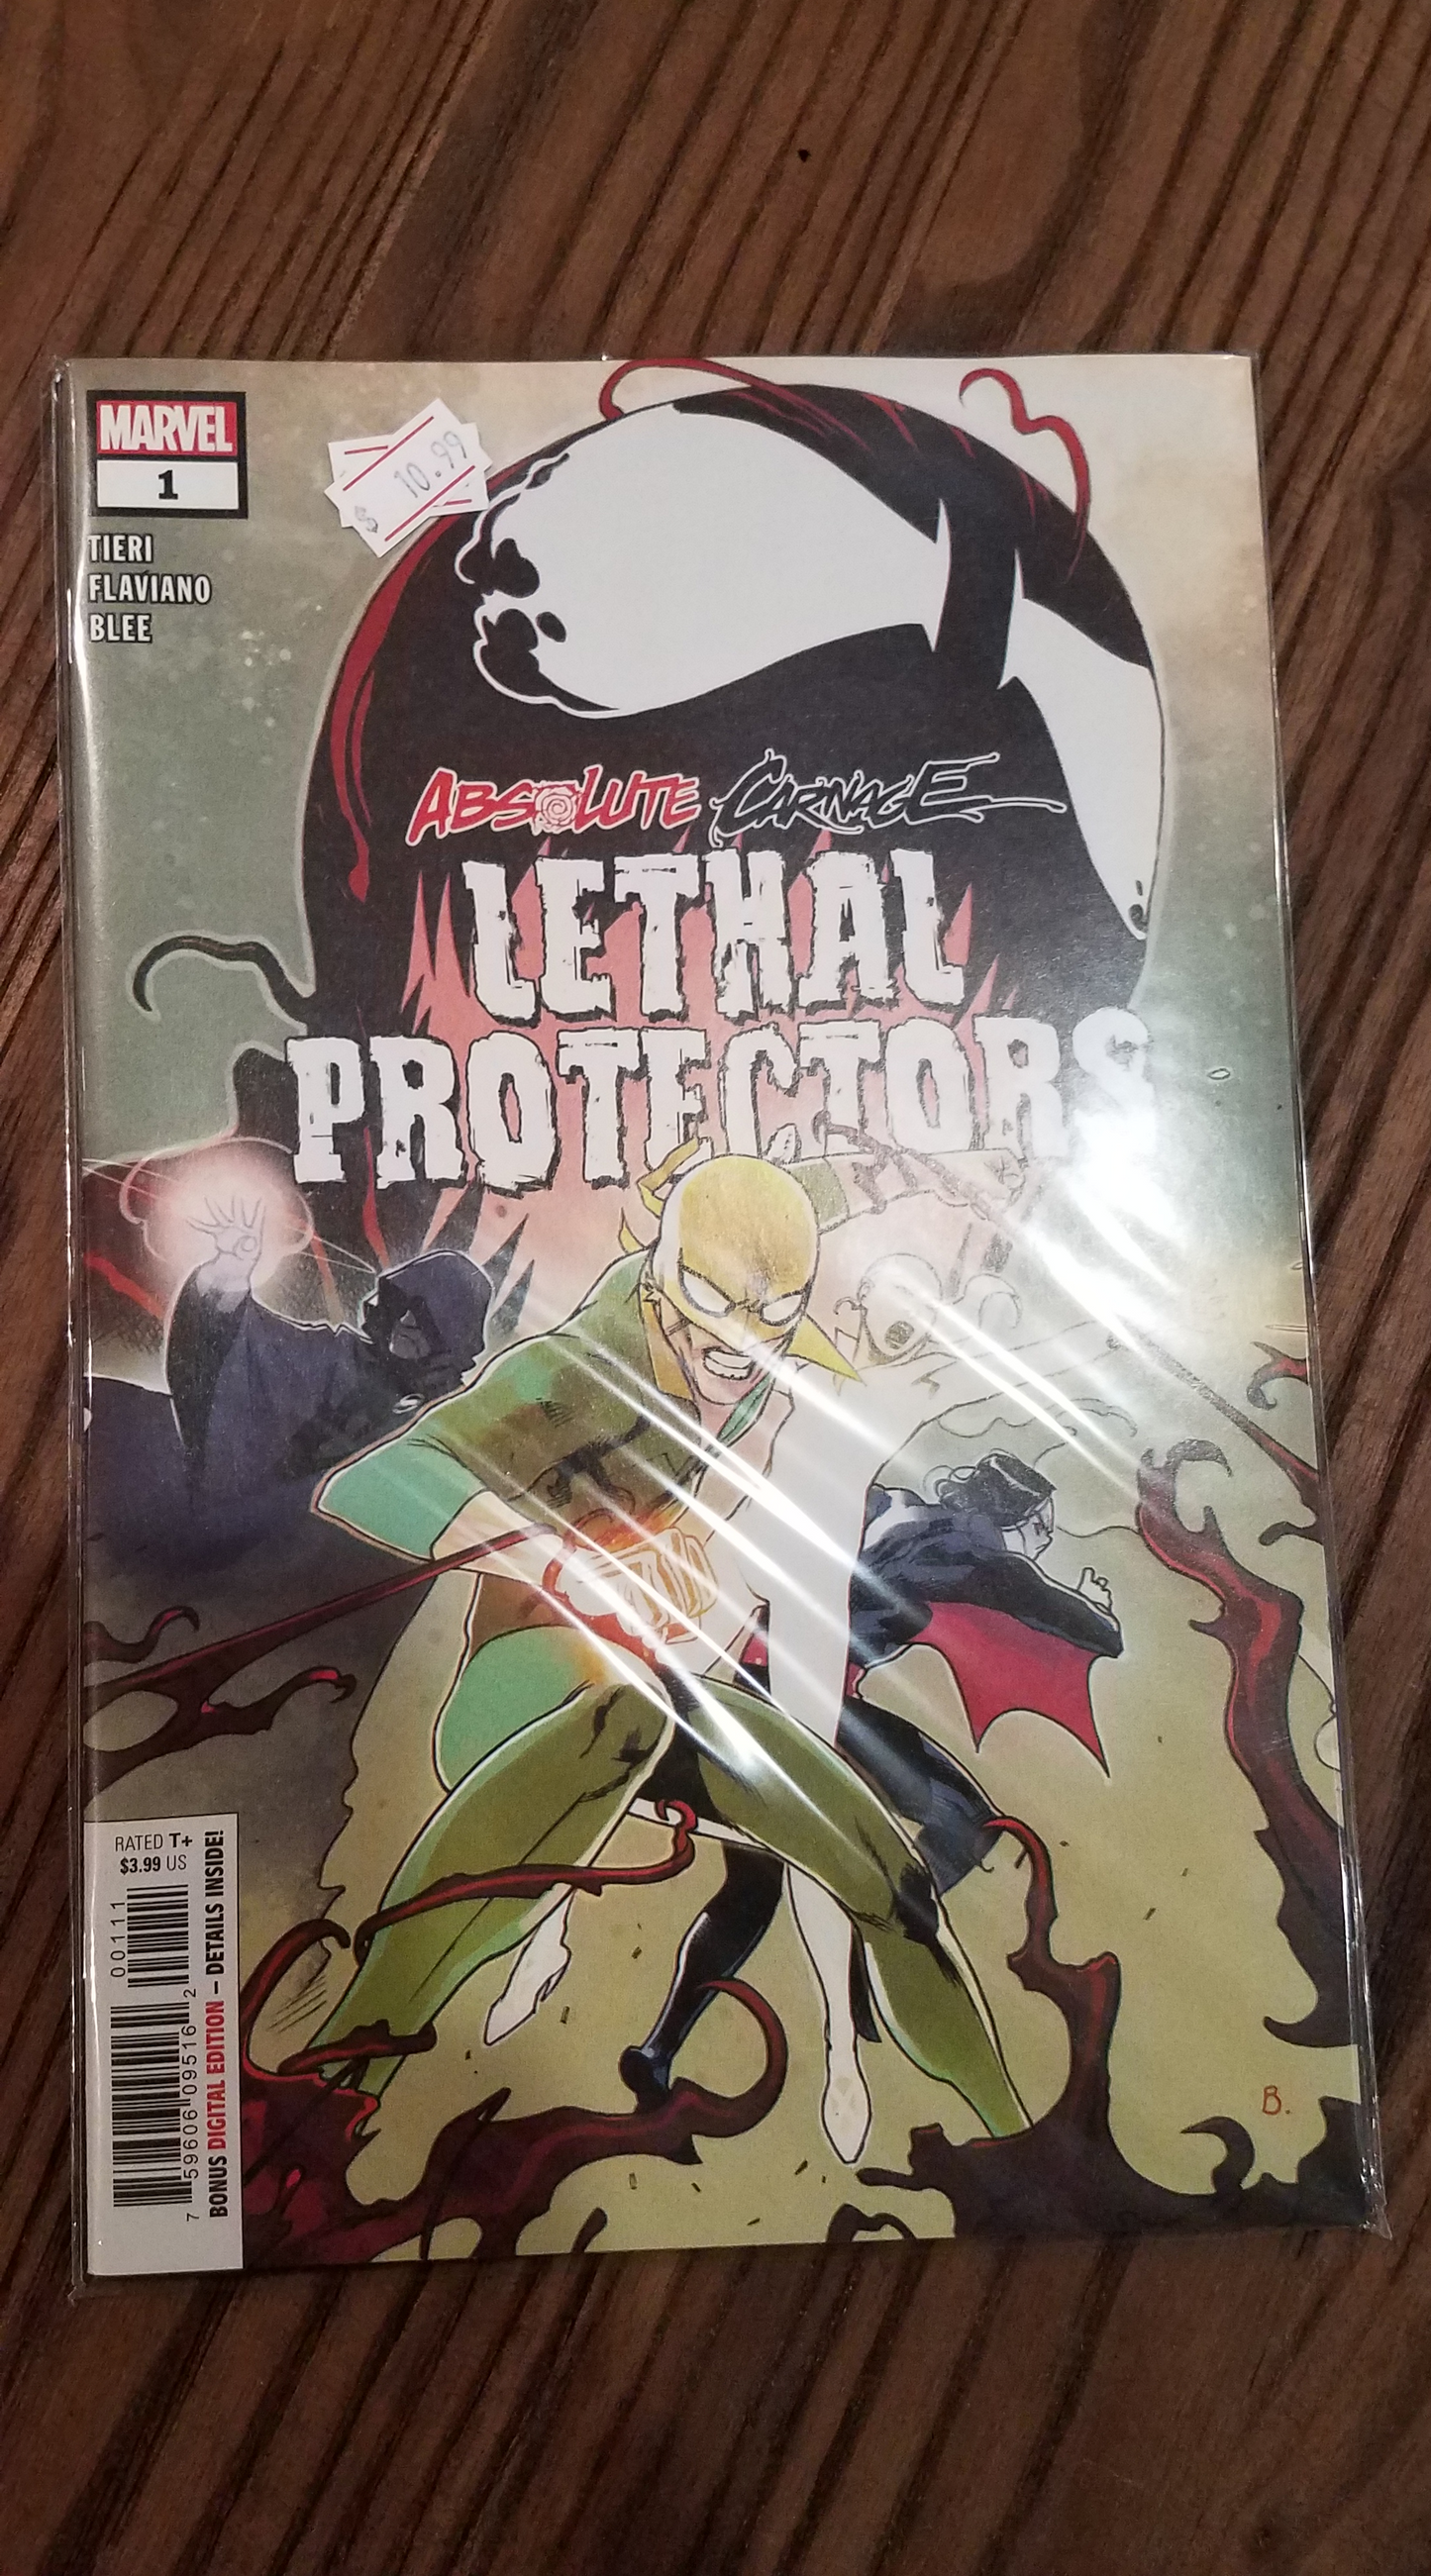 Comics: Absolute Carnage Tie-In - Lethal Protectors